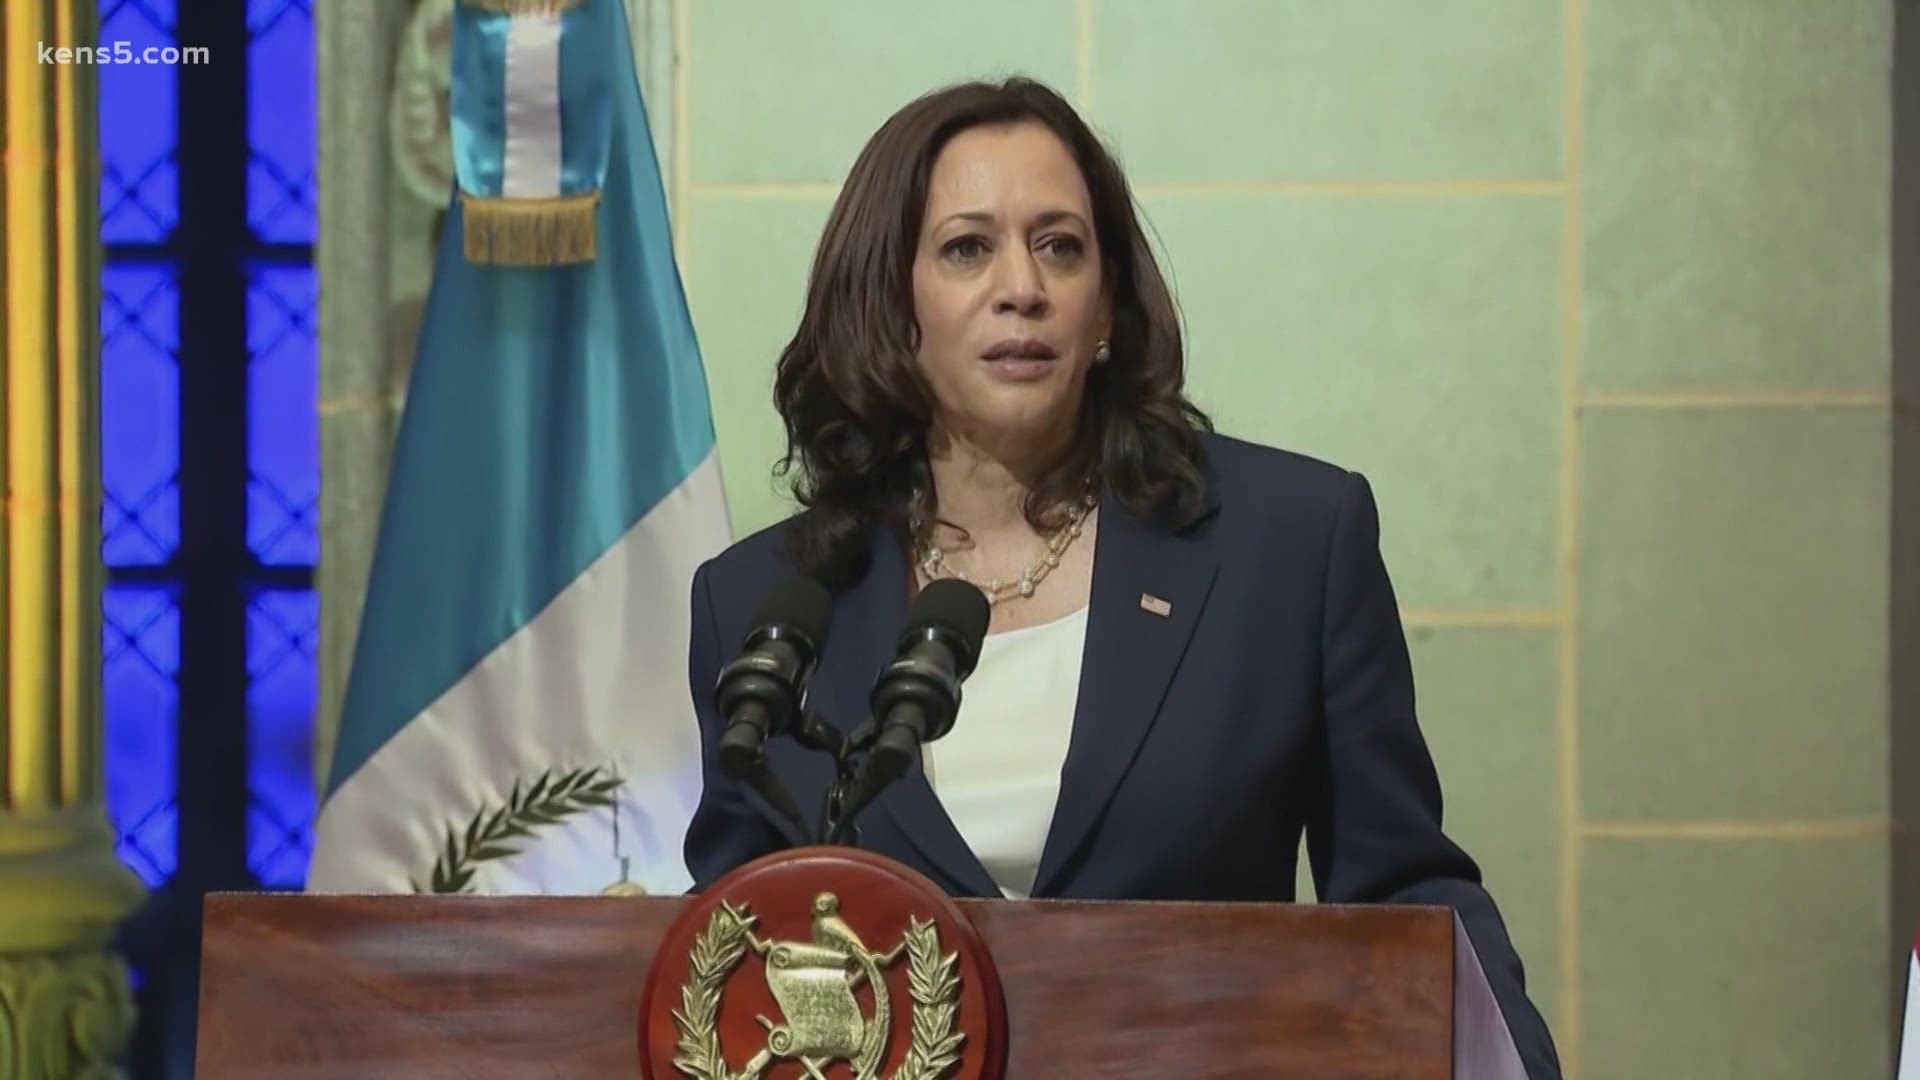 Harris will visit the border town of El Paso as part of an administration effort to contain migration.